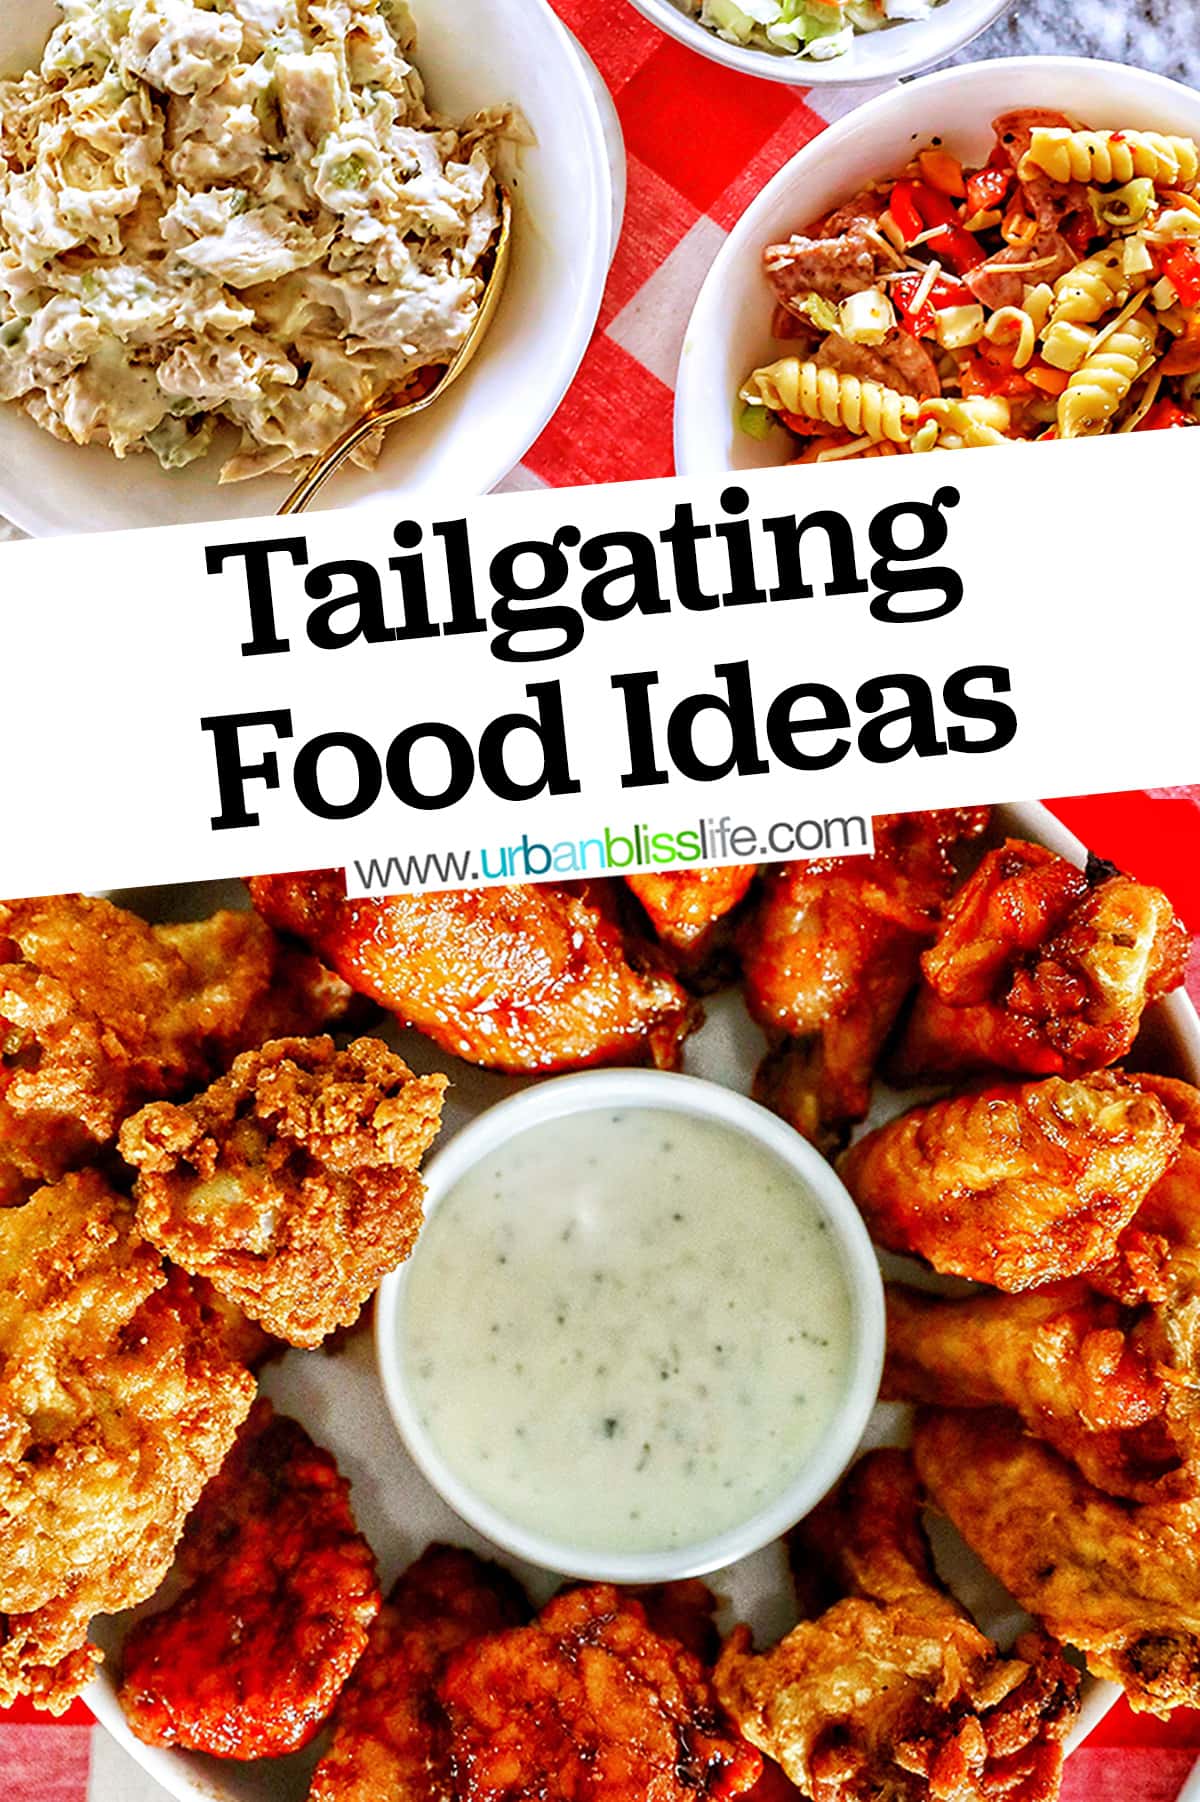 tailgating food - wings, pasta salad - against red and white checkered tablecloth with text overlay